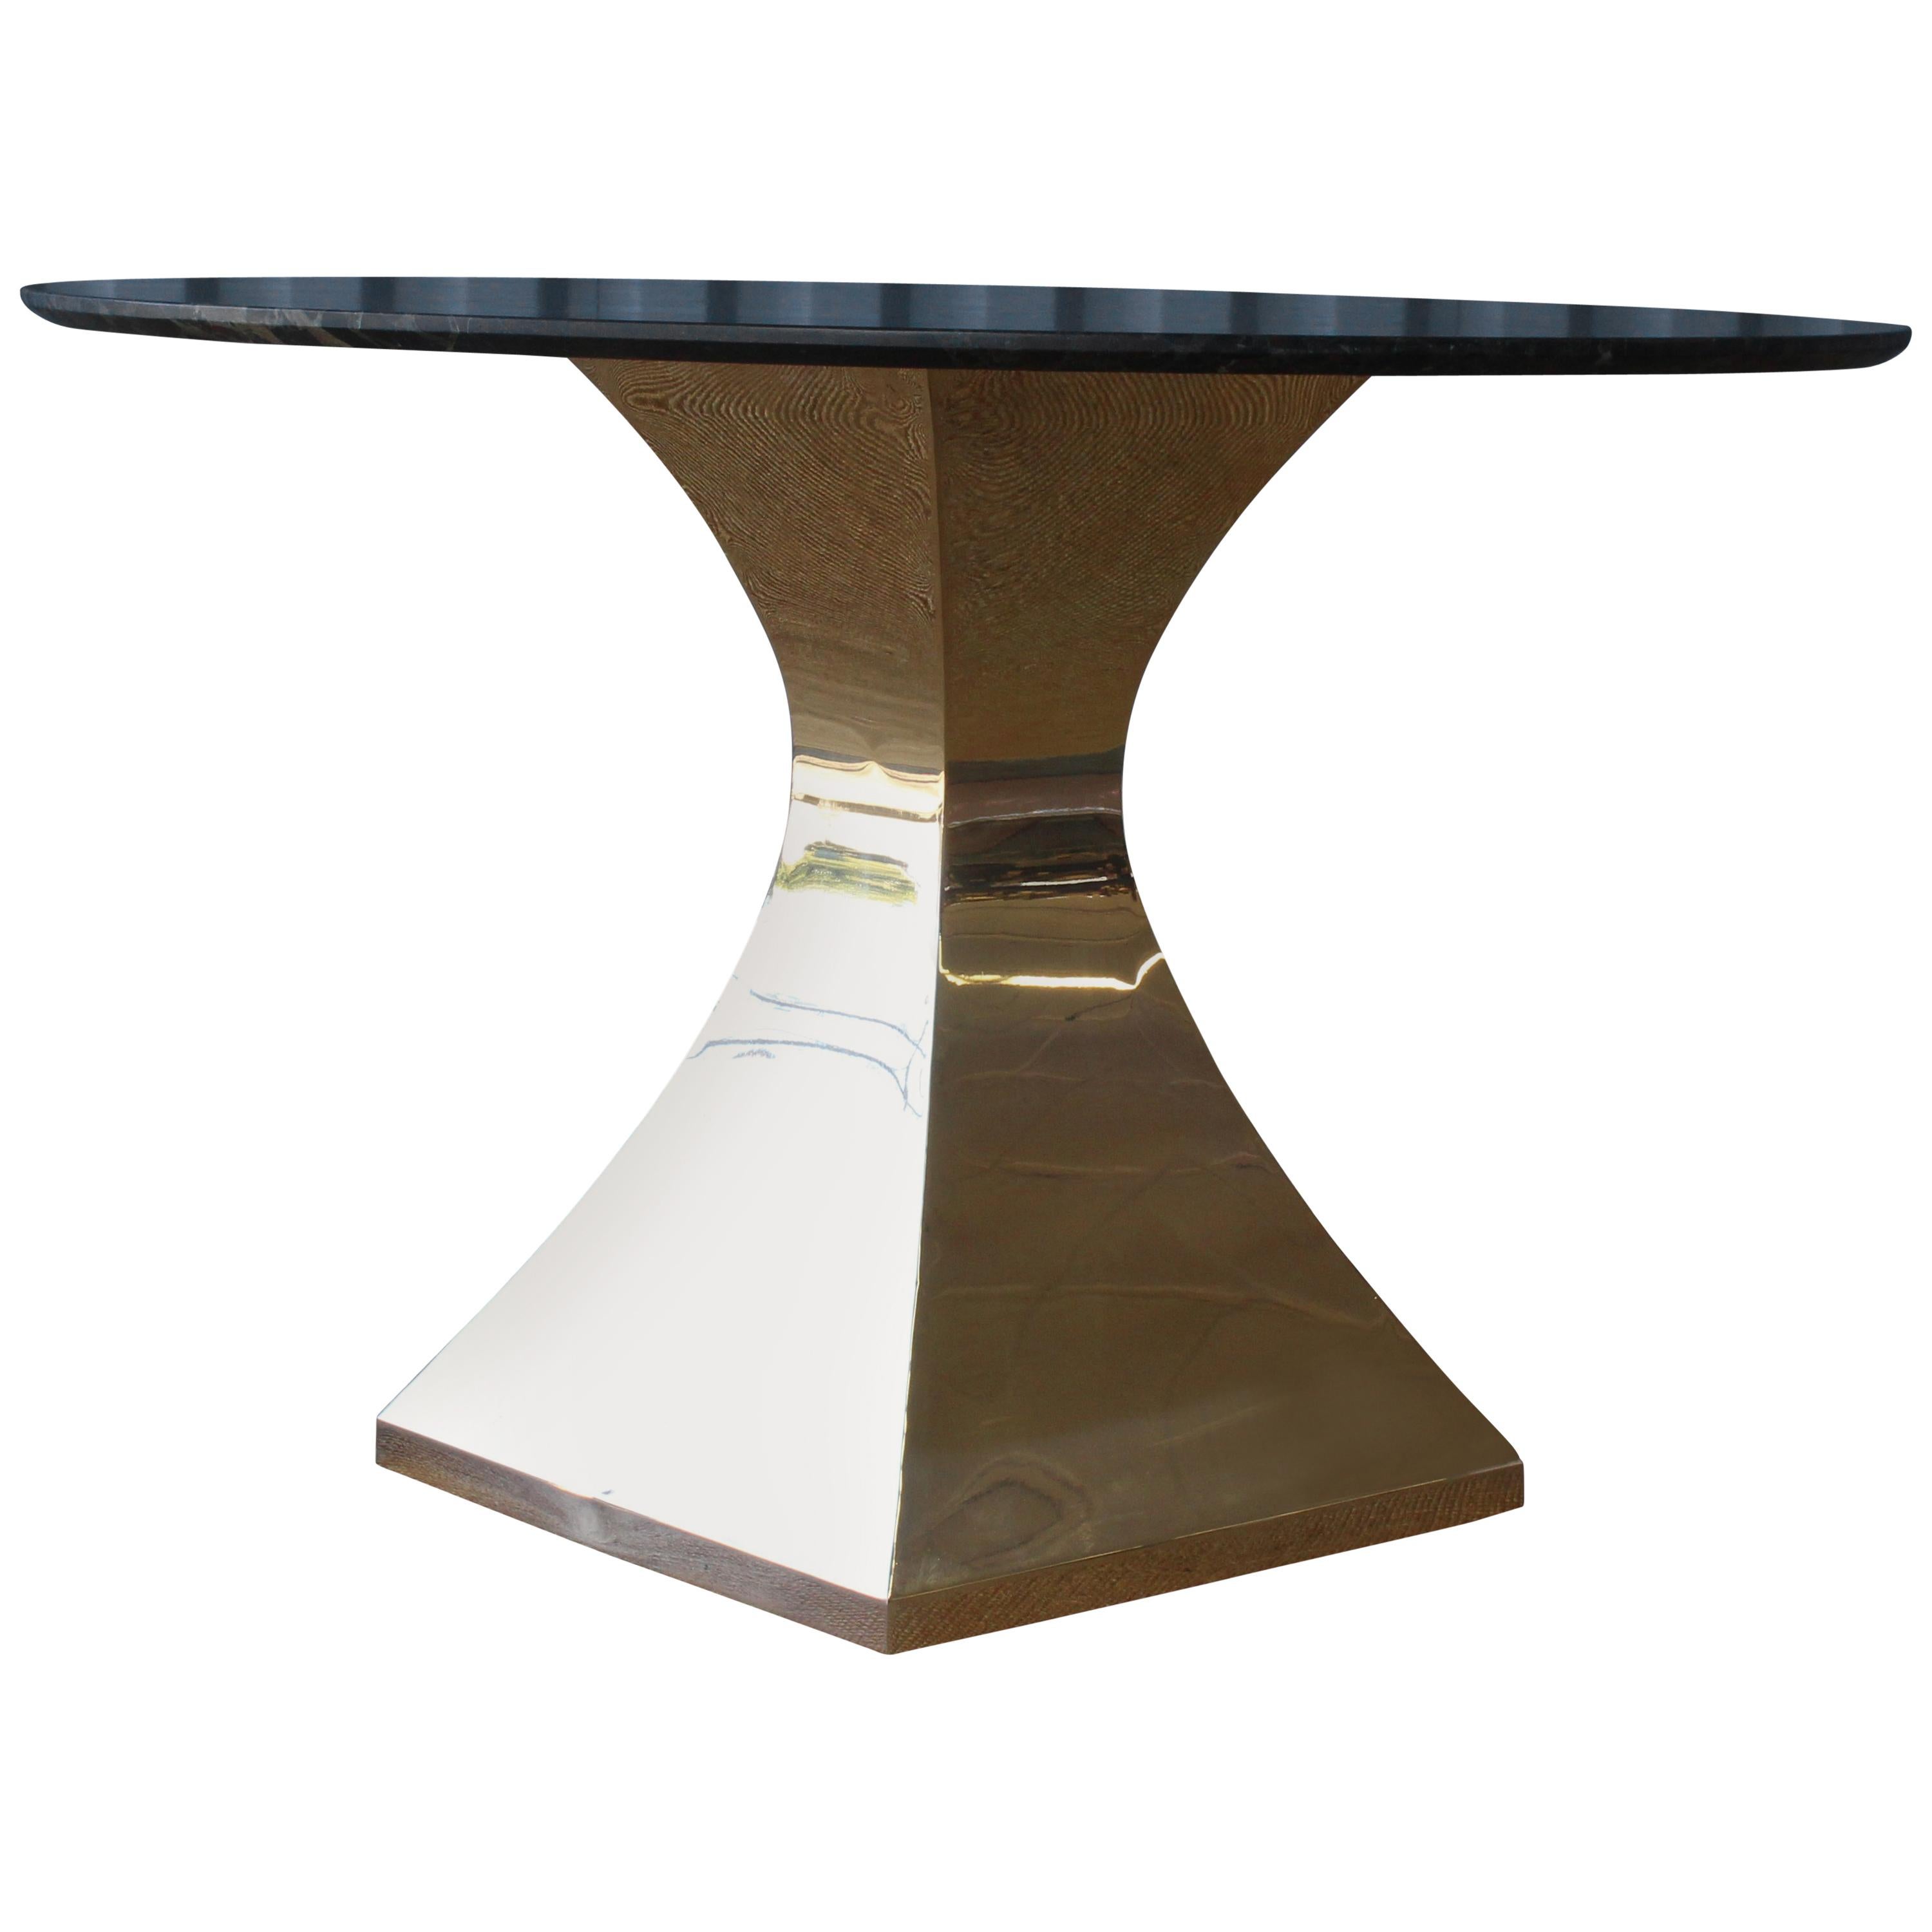 Dining Table with Quartz Stone Top on a Brass Plated Base